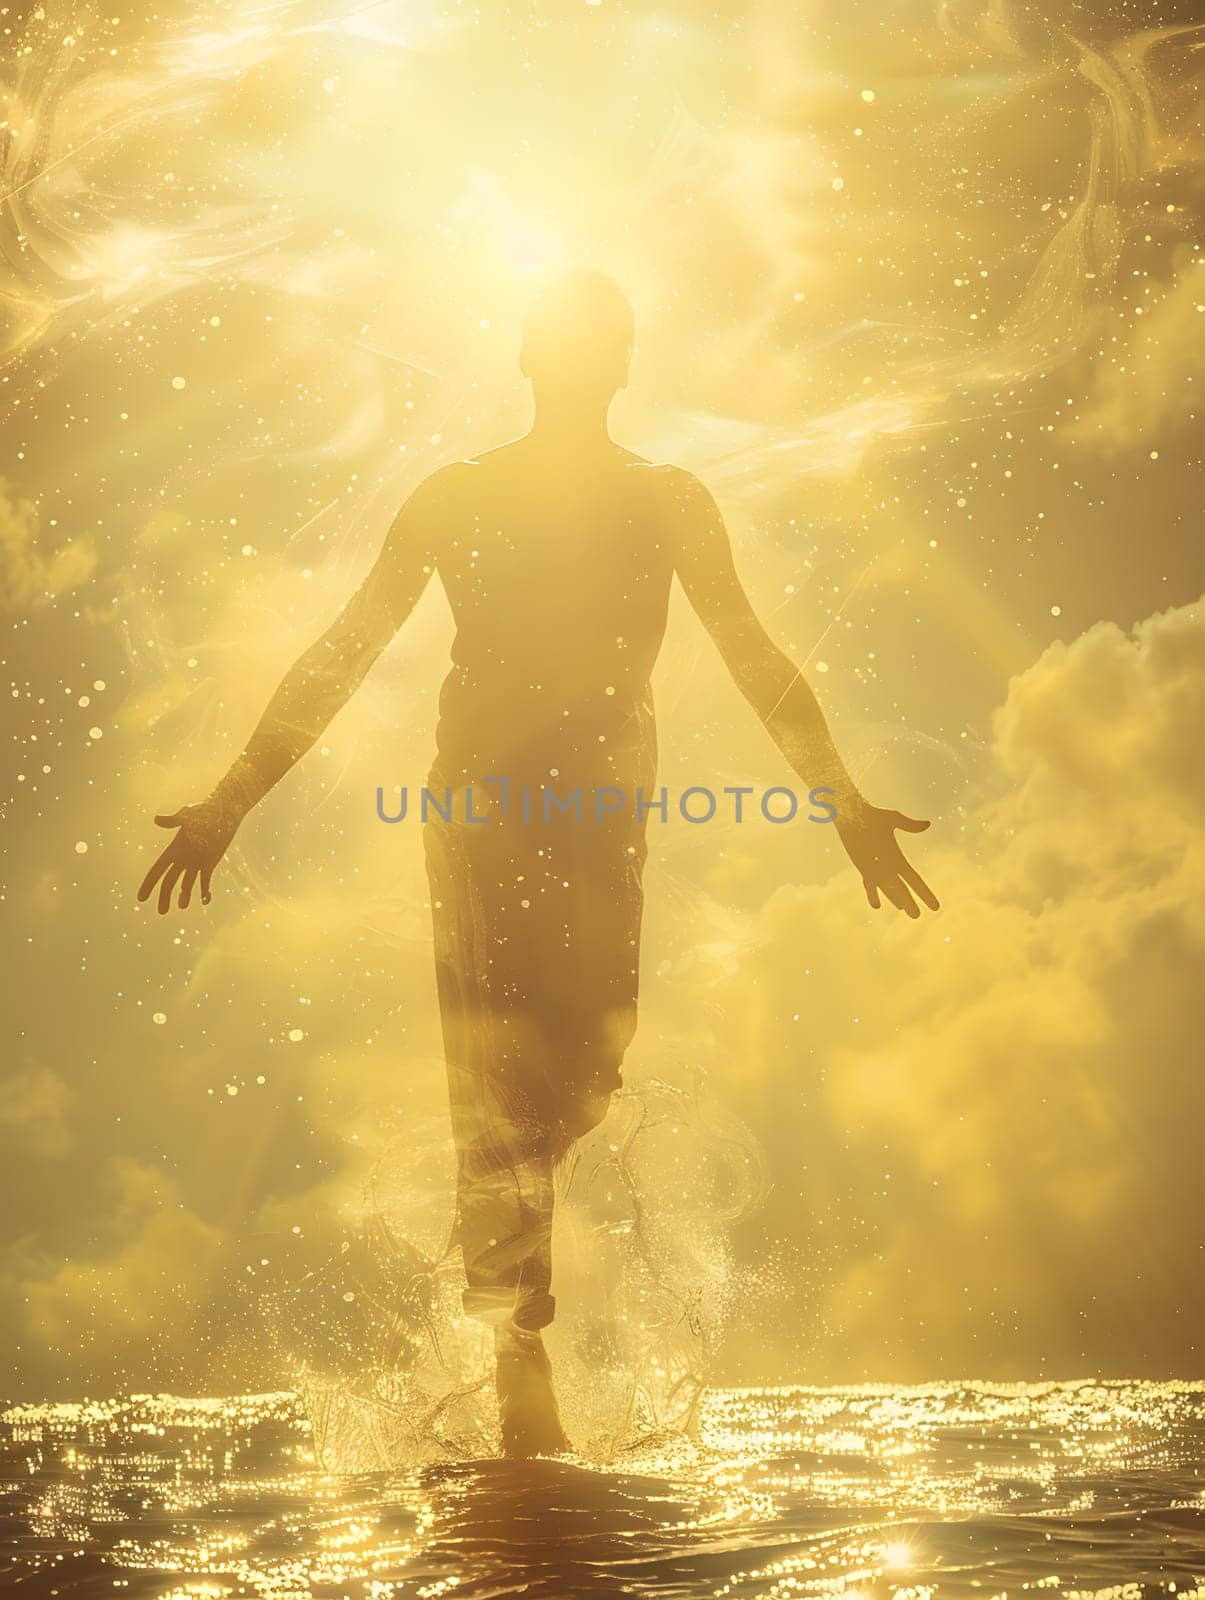 A man joyfully walks through the water with his arms stretched out, basking in the suns warm rays. The serene landscape and gentle water create a peaceful atmosphere